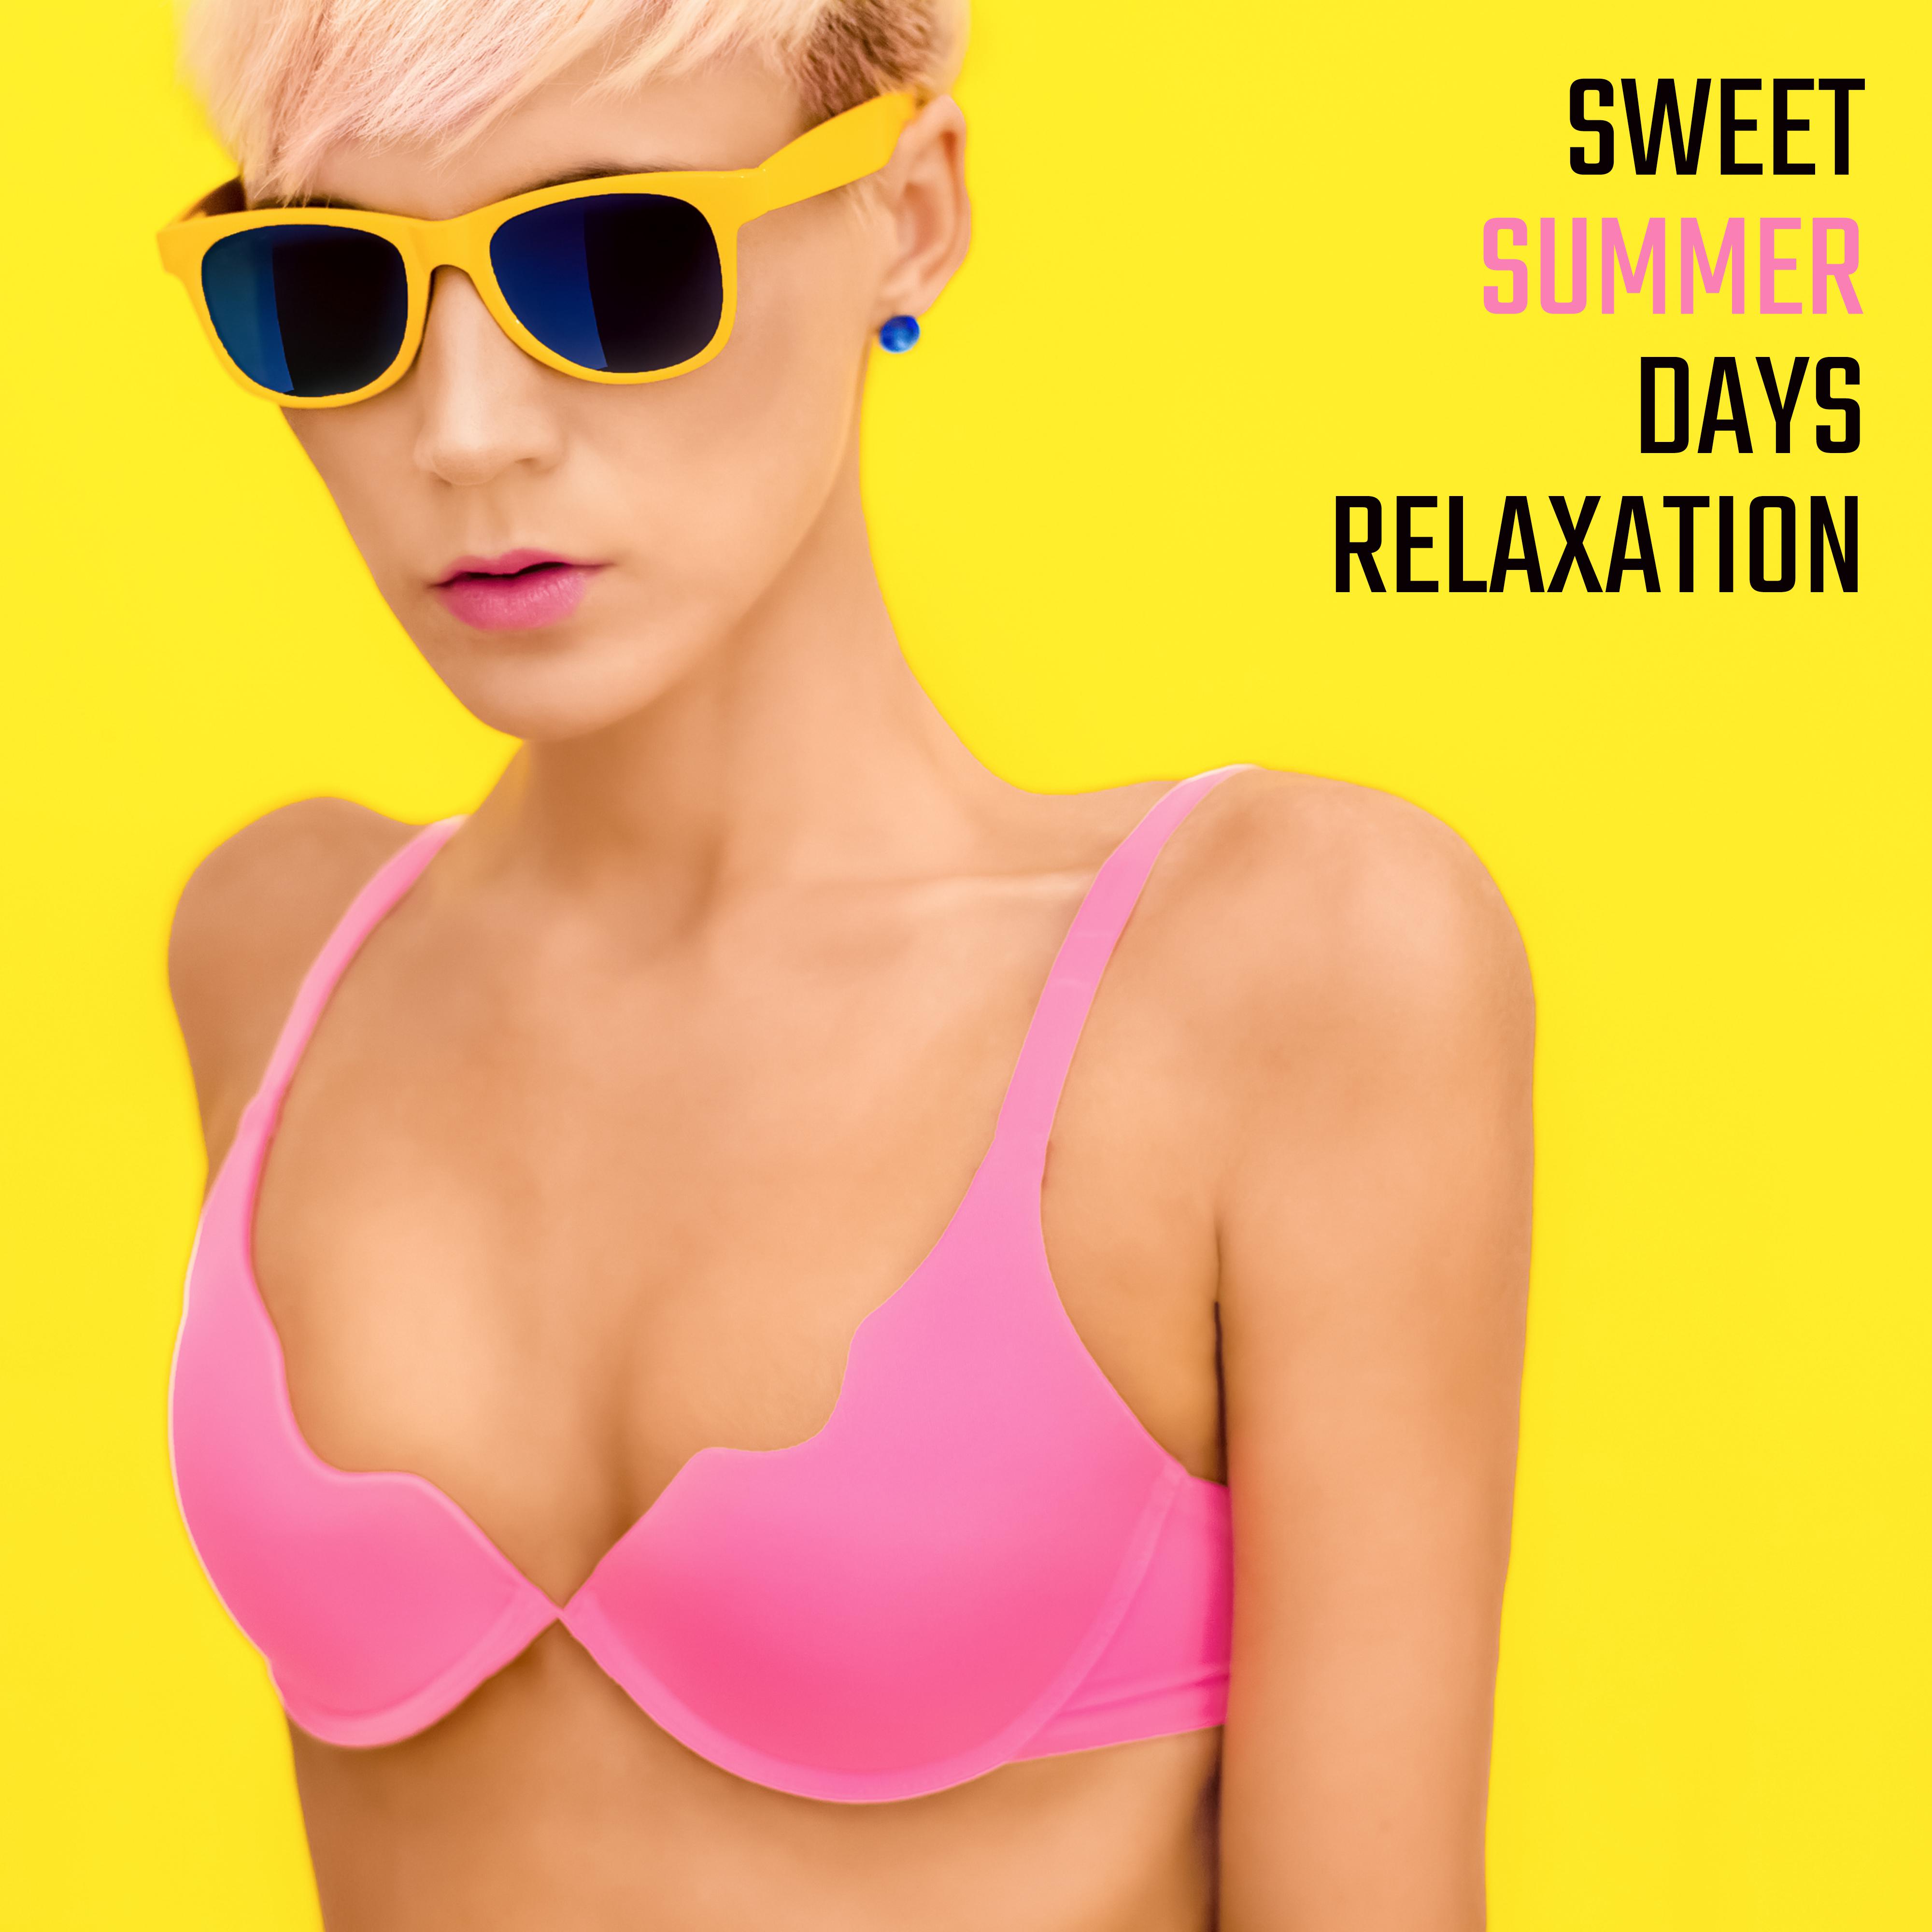 Sweet Summer Days Relaxation: 2019 Soft Chillout Music Compilation for Total Calming Down, Full Relax After Tough Day, Stress Reducing Beats